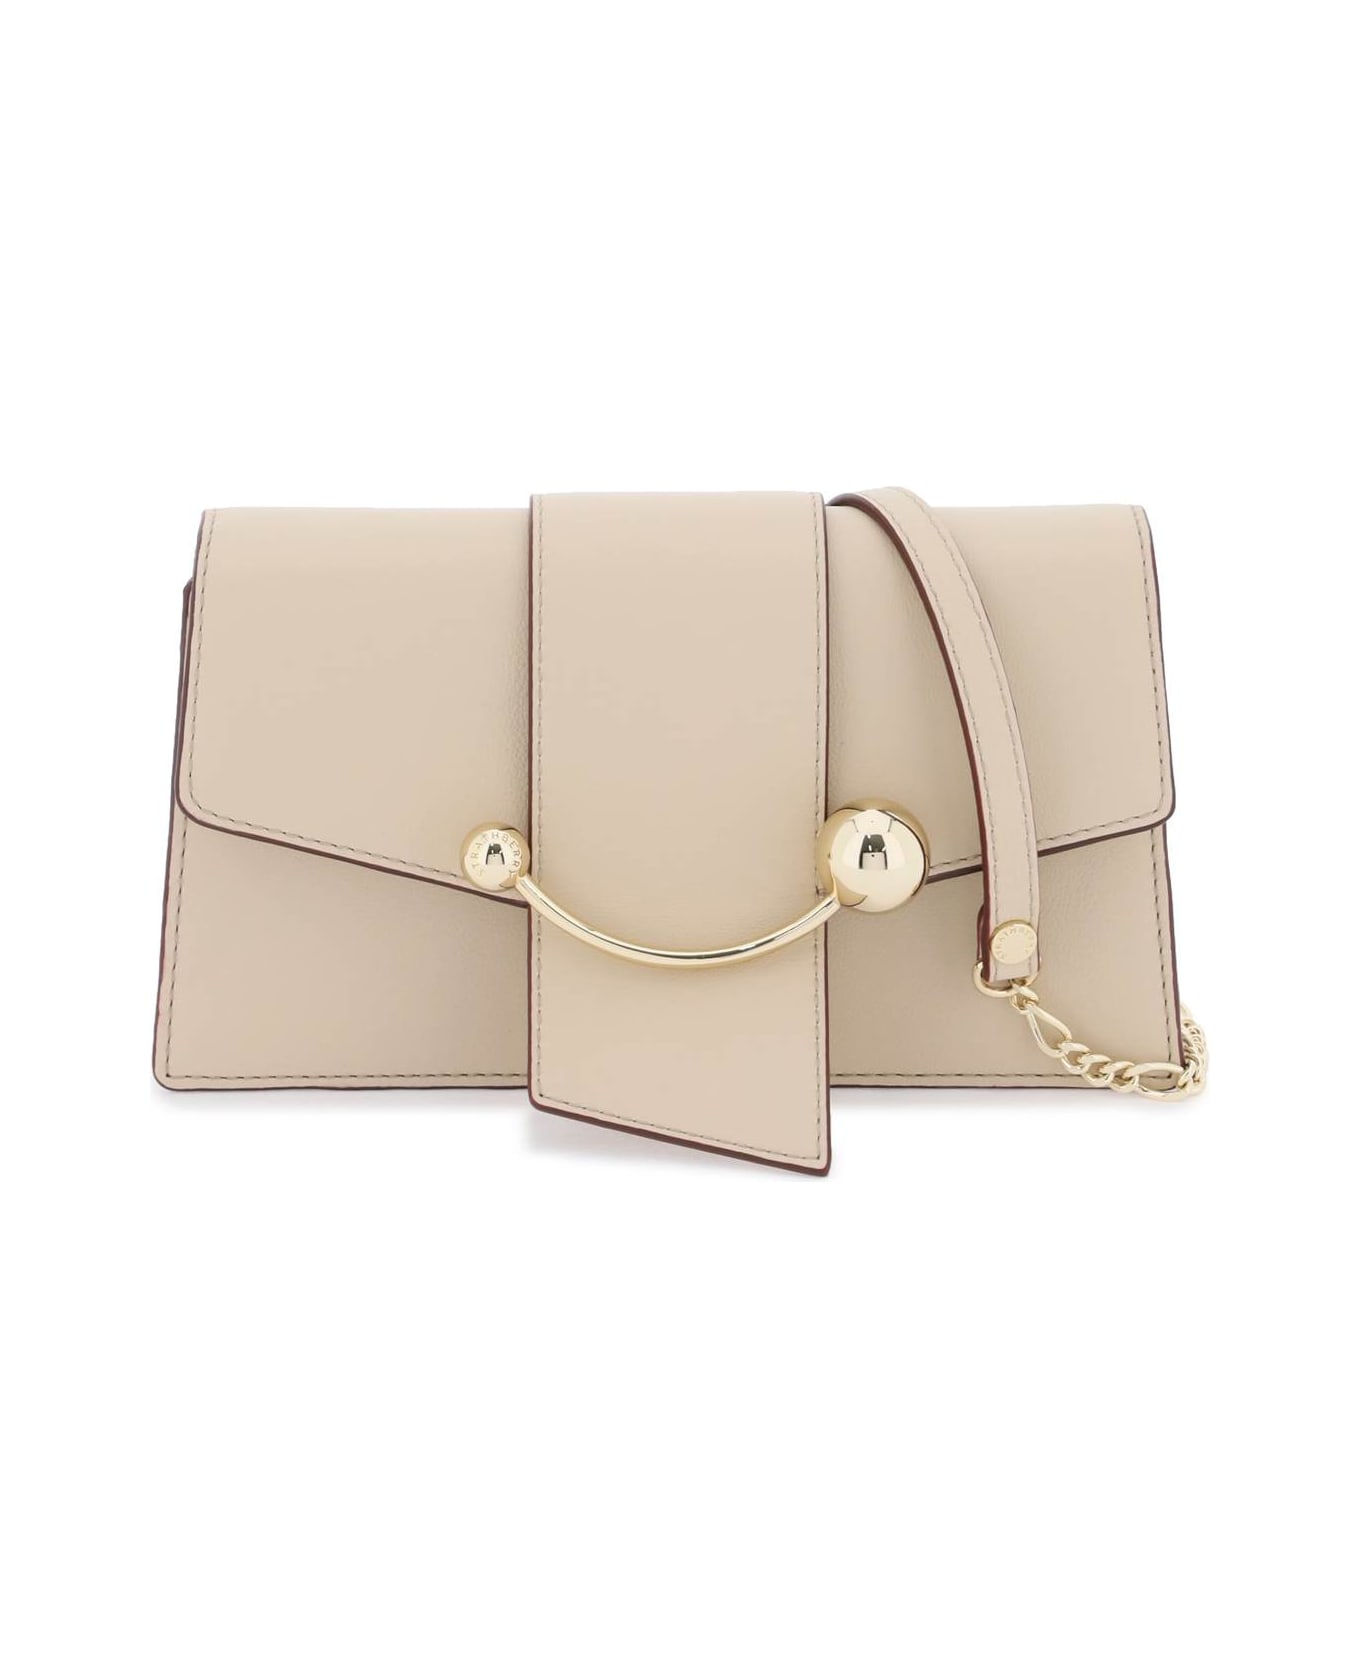 Strathberry Crescent On A Chain Crossbody Mini Bag - OAT (Beige)